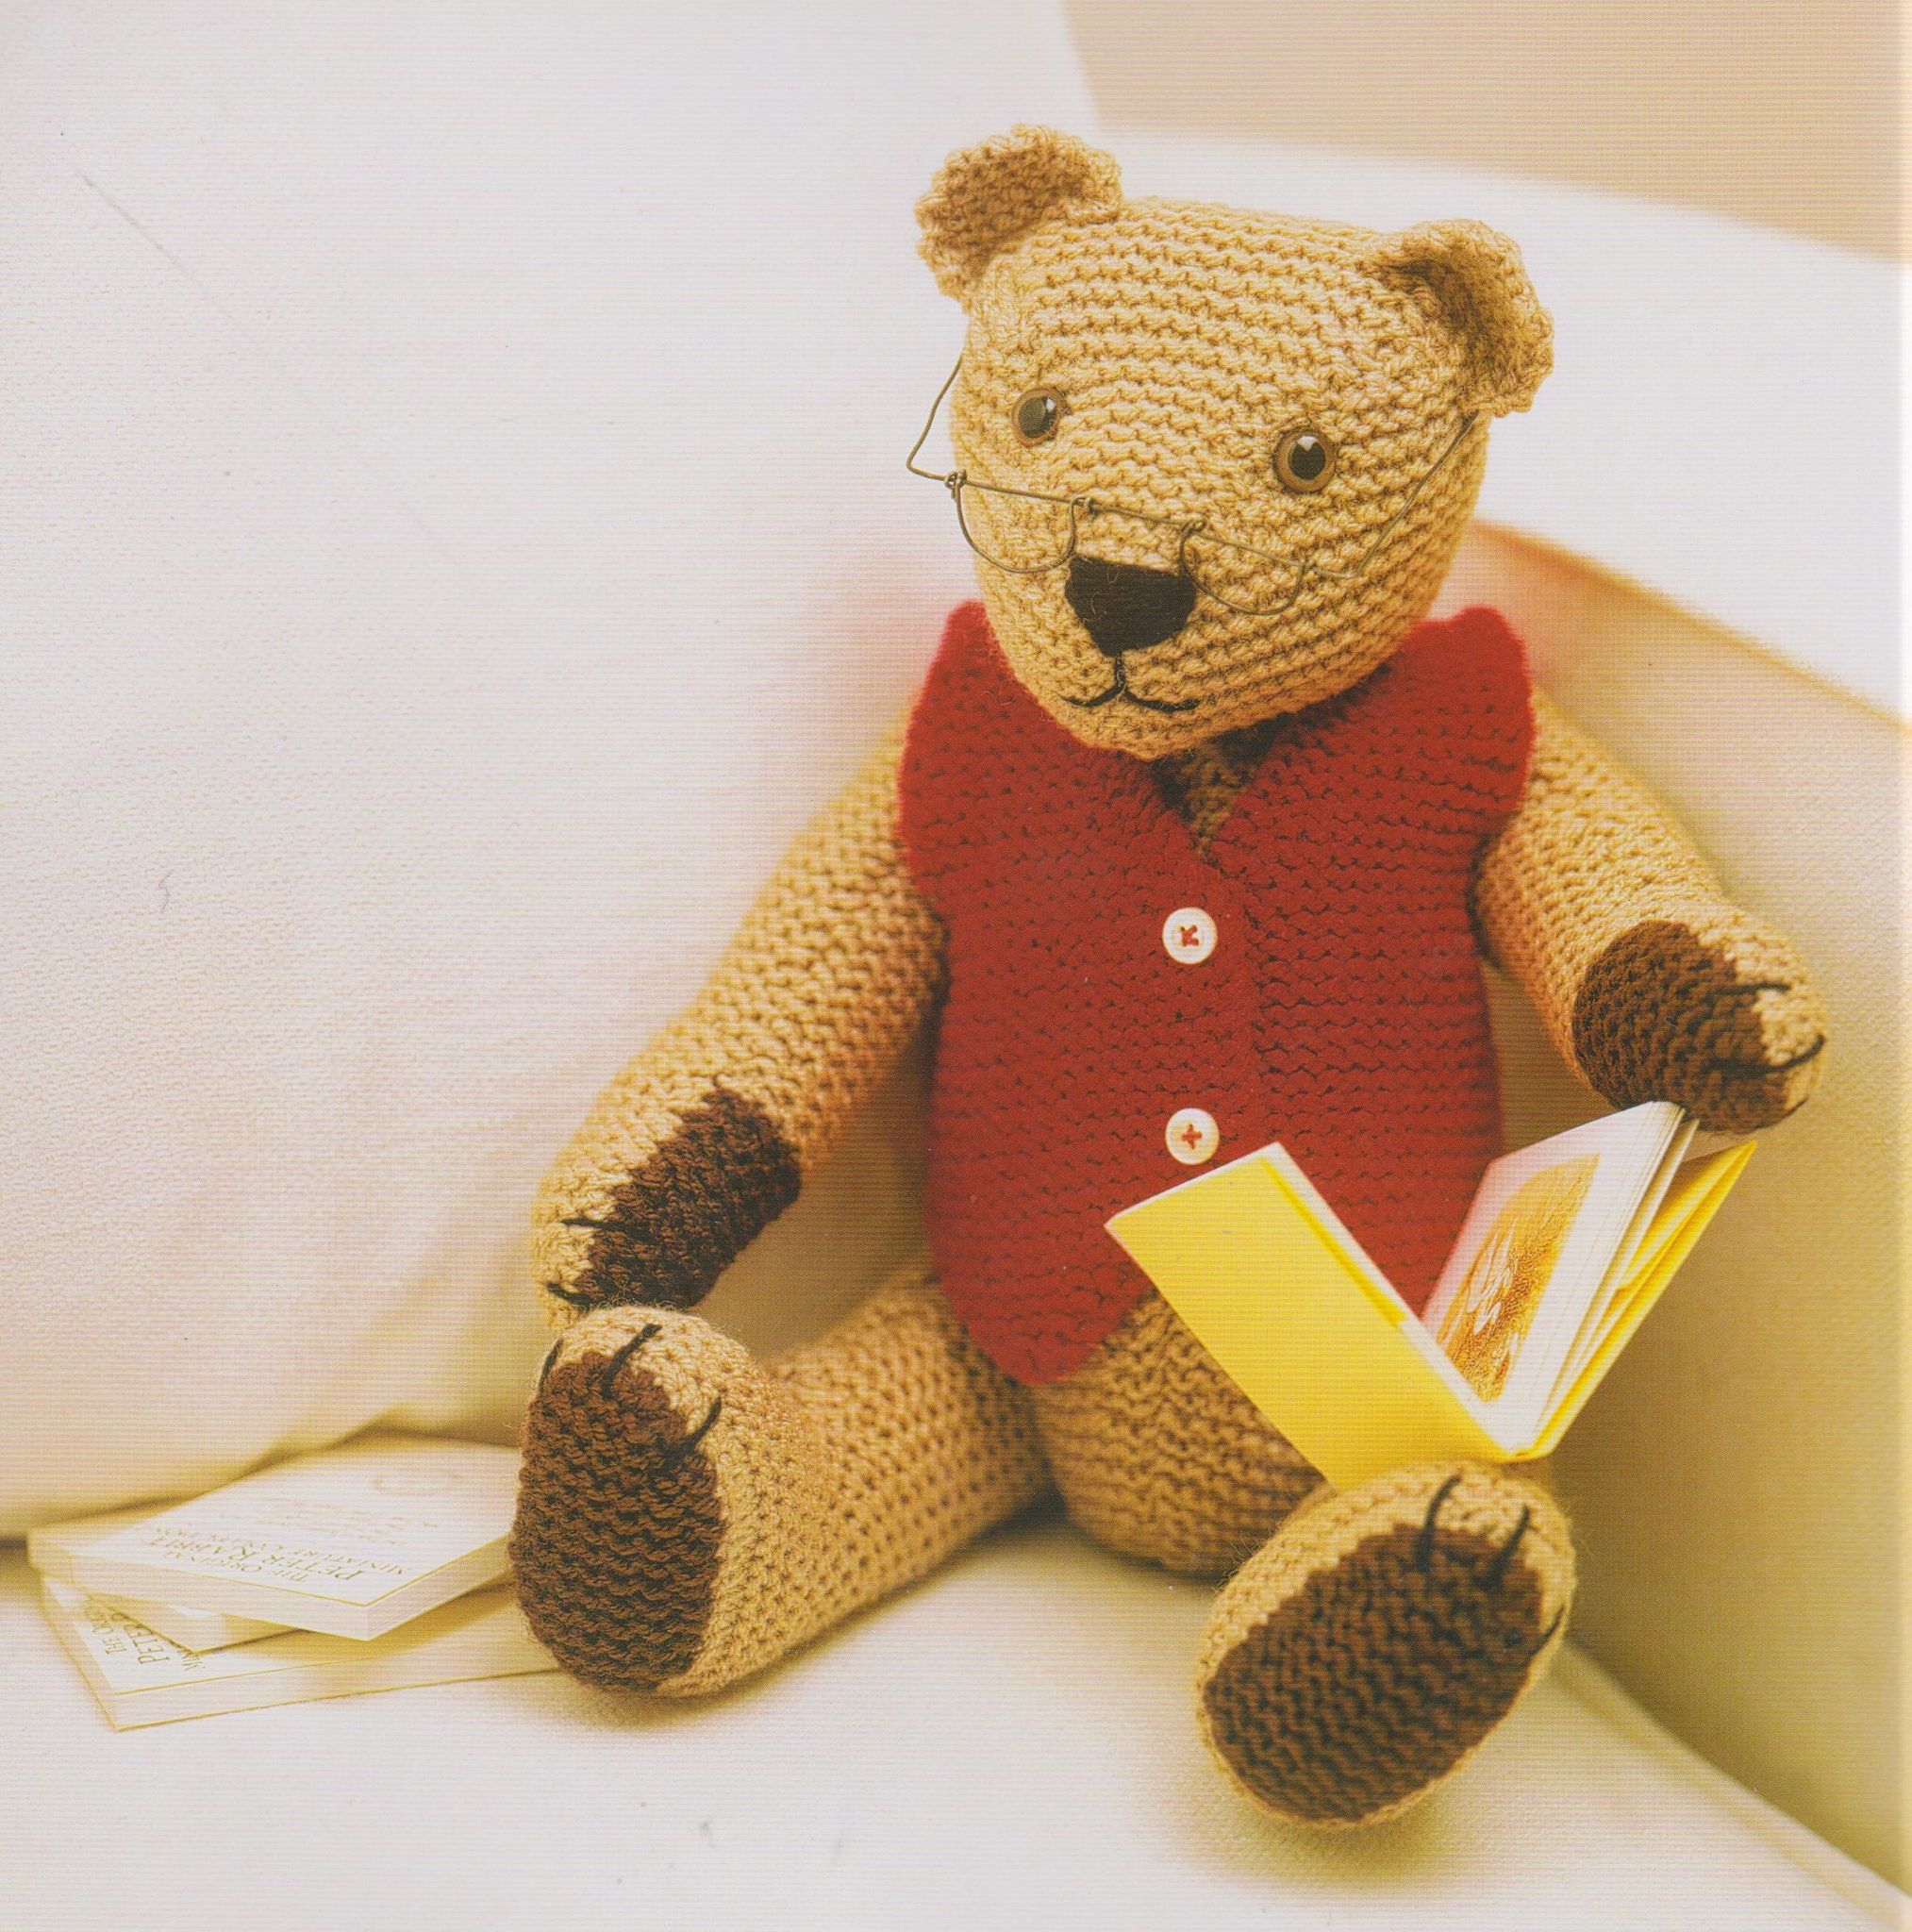 Knitting Patterns For Teddy Bear Clothes Pdf Vintage Knitting Pattern 13 14 Teddy Bear With Clothes In Double Knitting Yarn